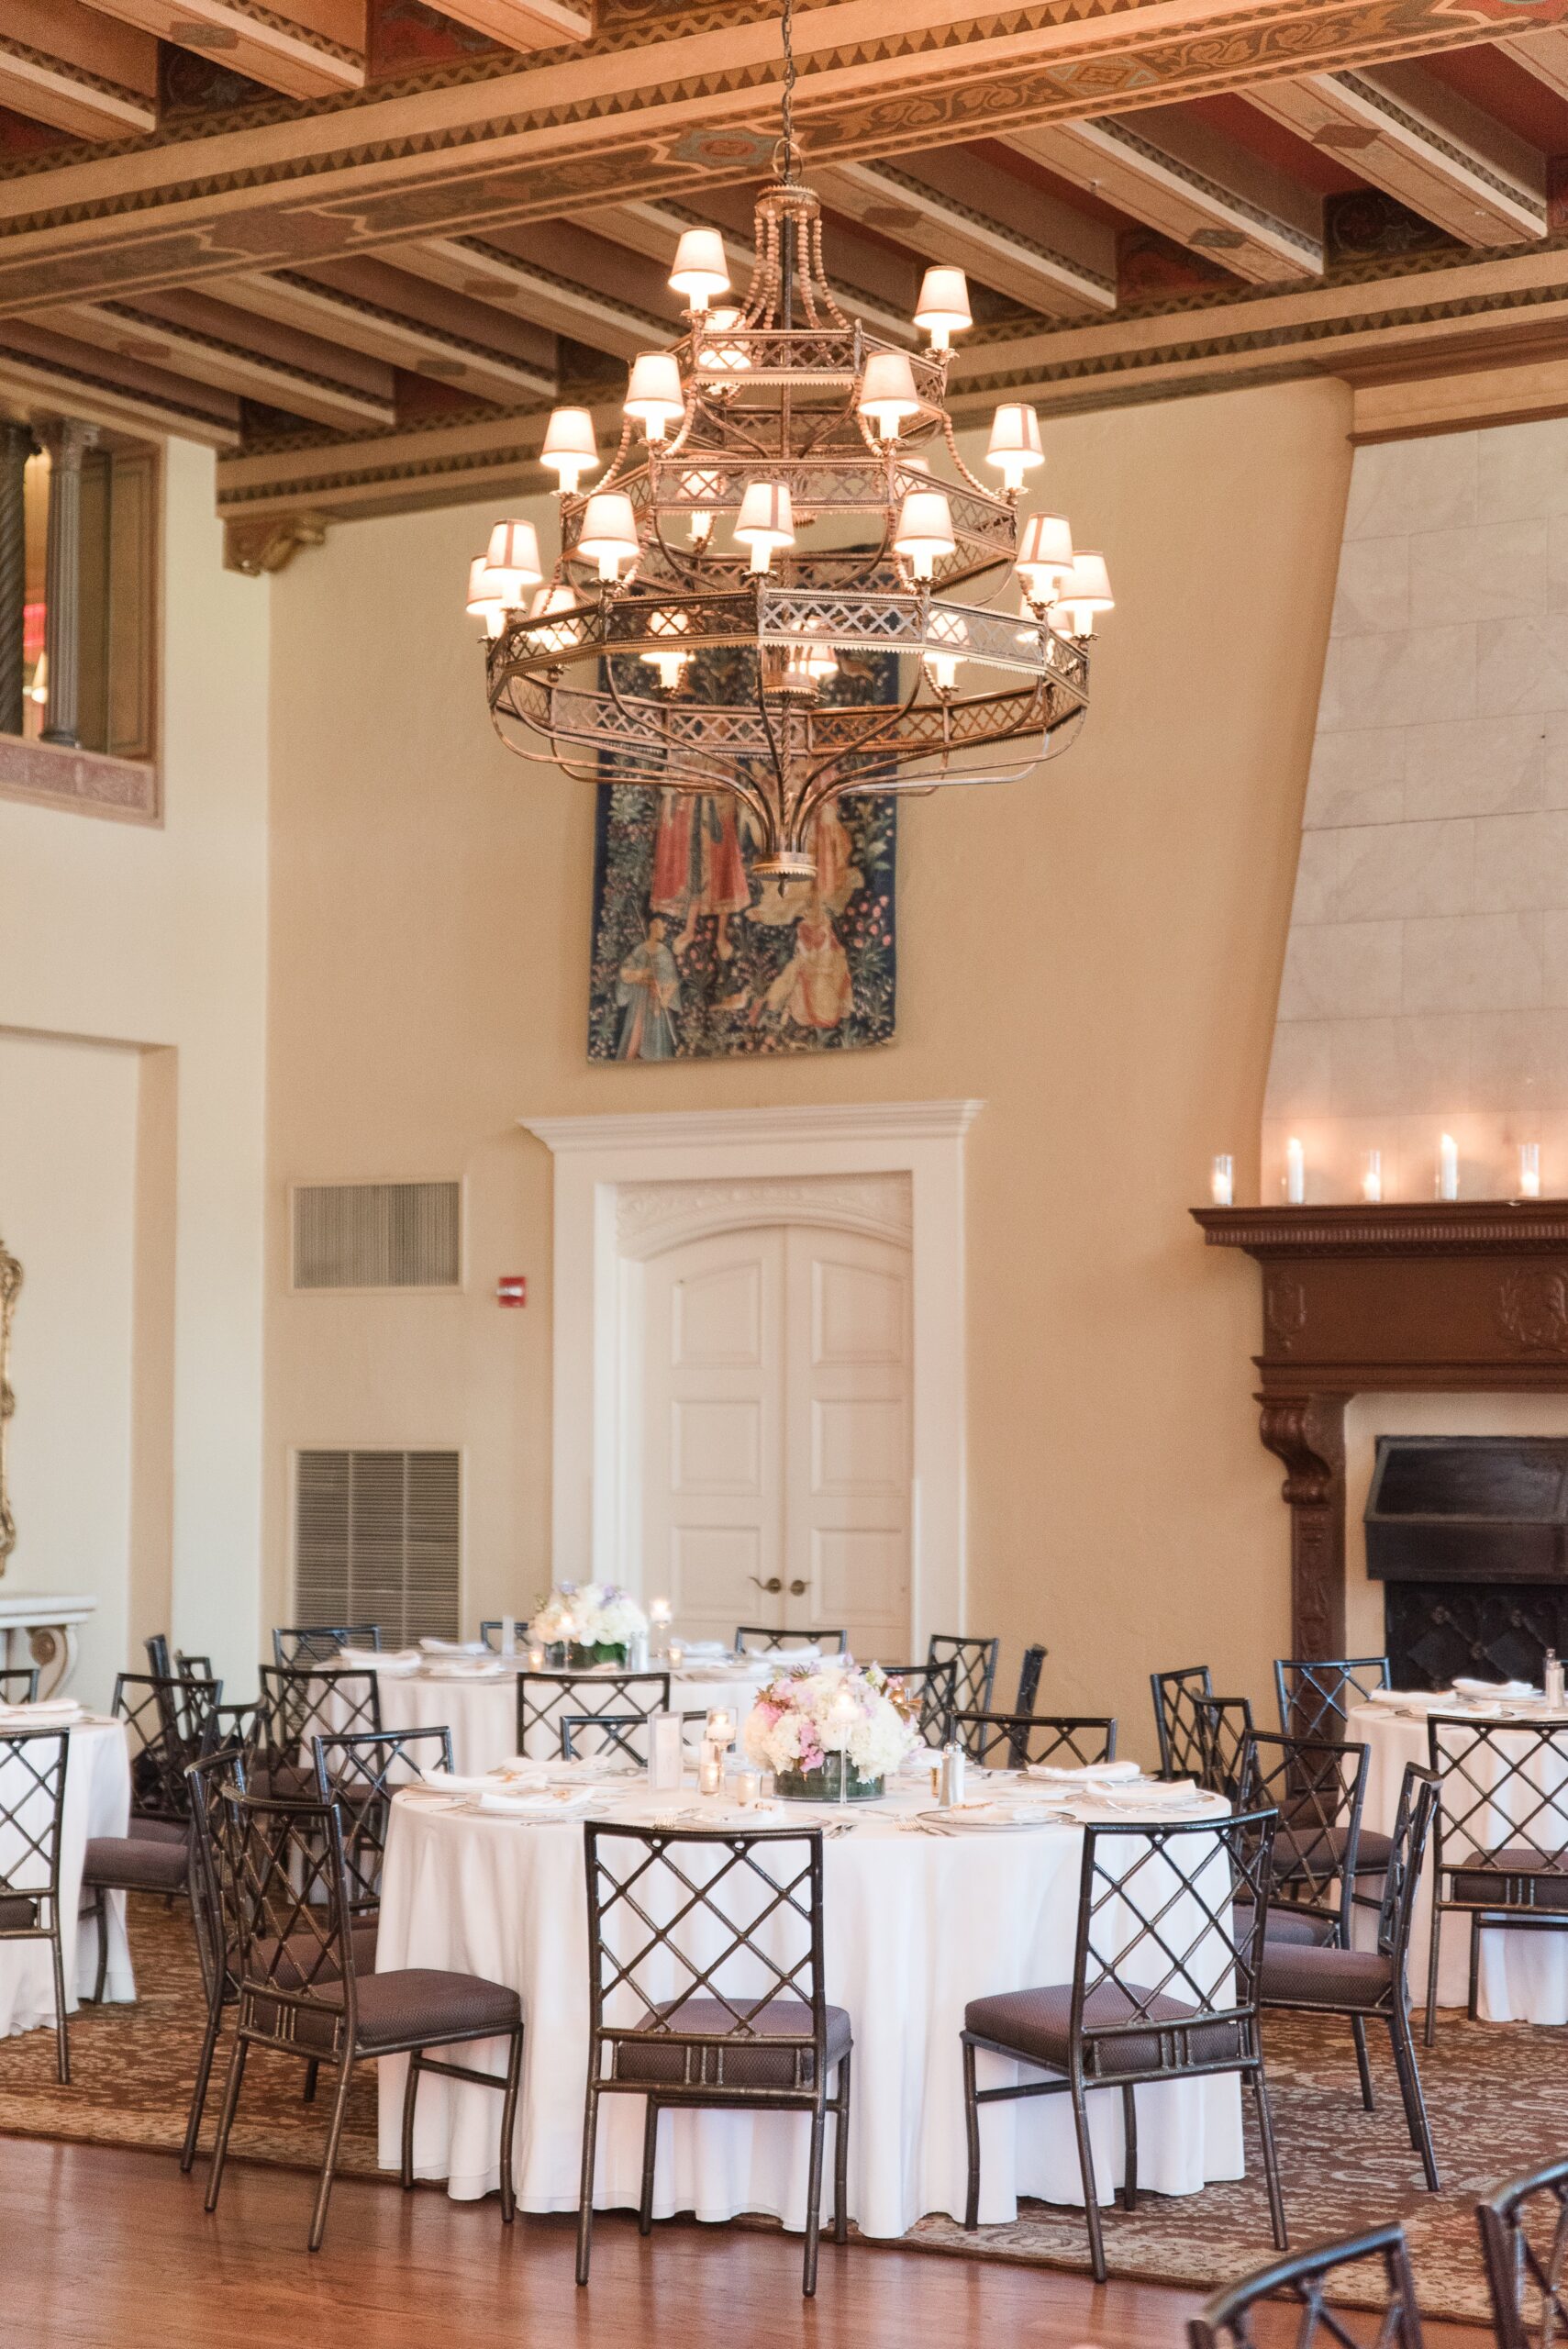 Details of the ornate Congressional Country Club Wedding reception room with chandelier